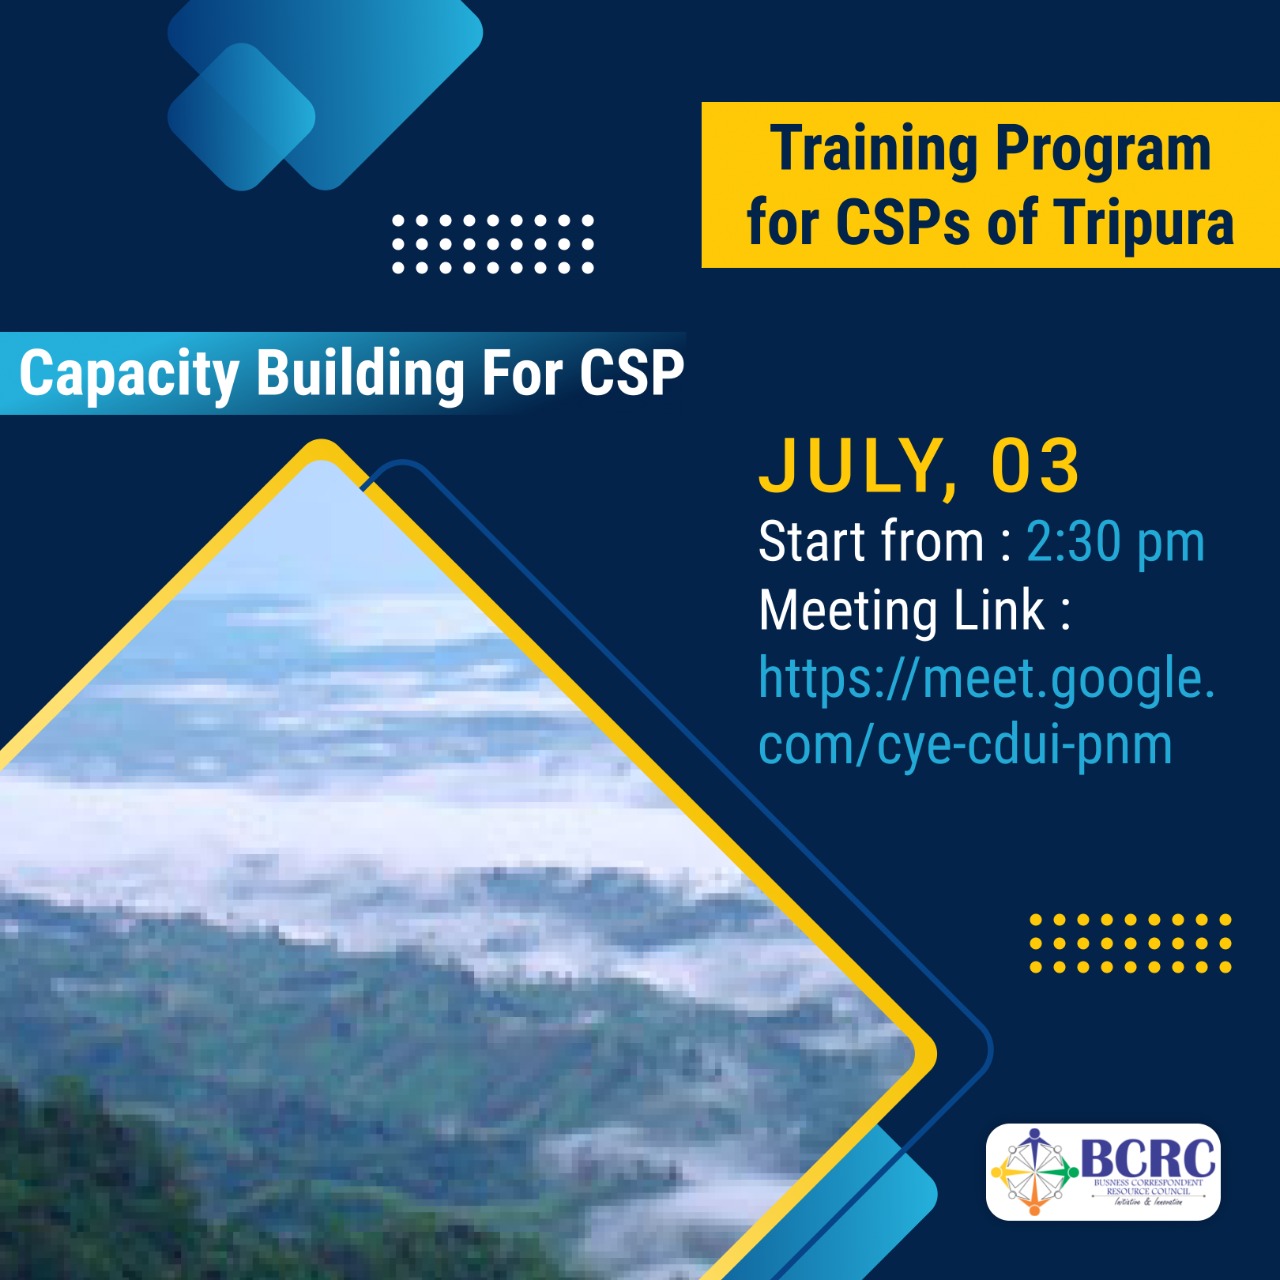 Training program  was conducted for CSPs of Tripura